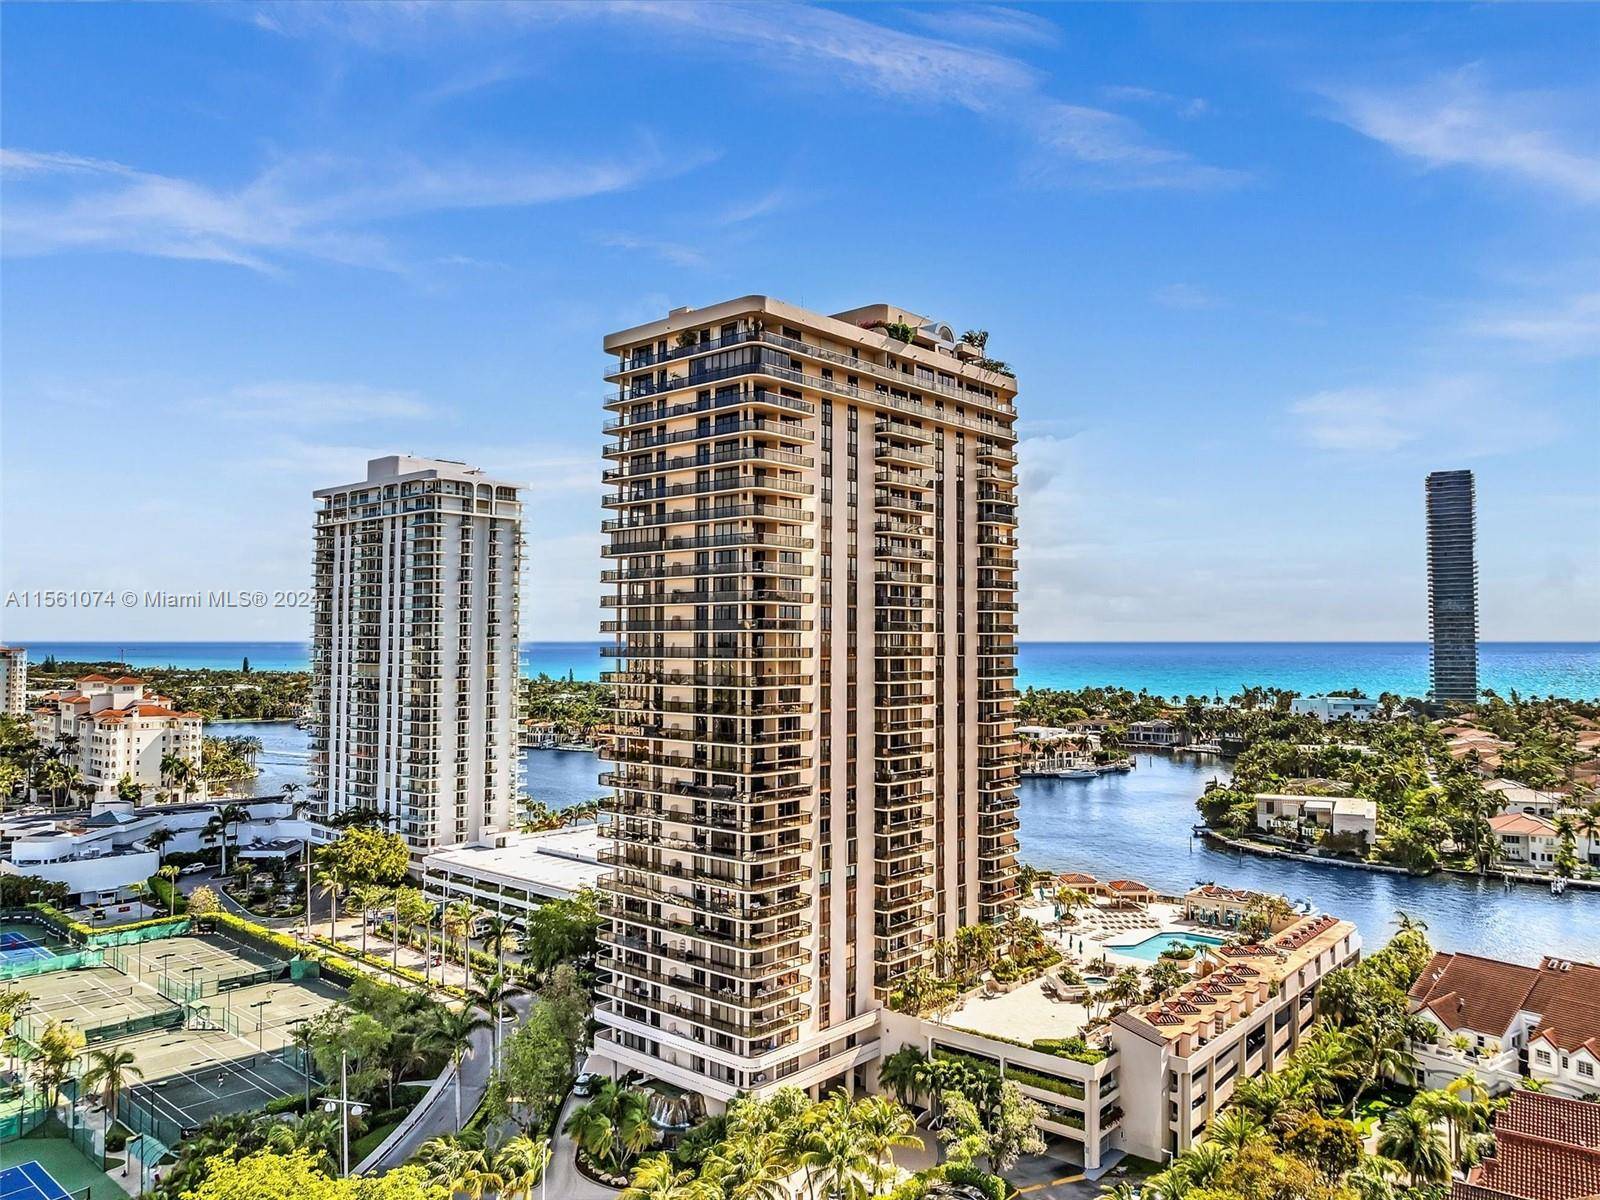 STUNNING INTRACOASTAL AND OCEAN VIEWS AS WELL AS DOWNTOWN AND THE FAMED TURNBERRY GOLF COURSE !